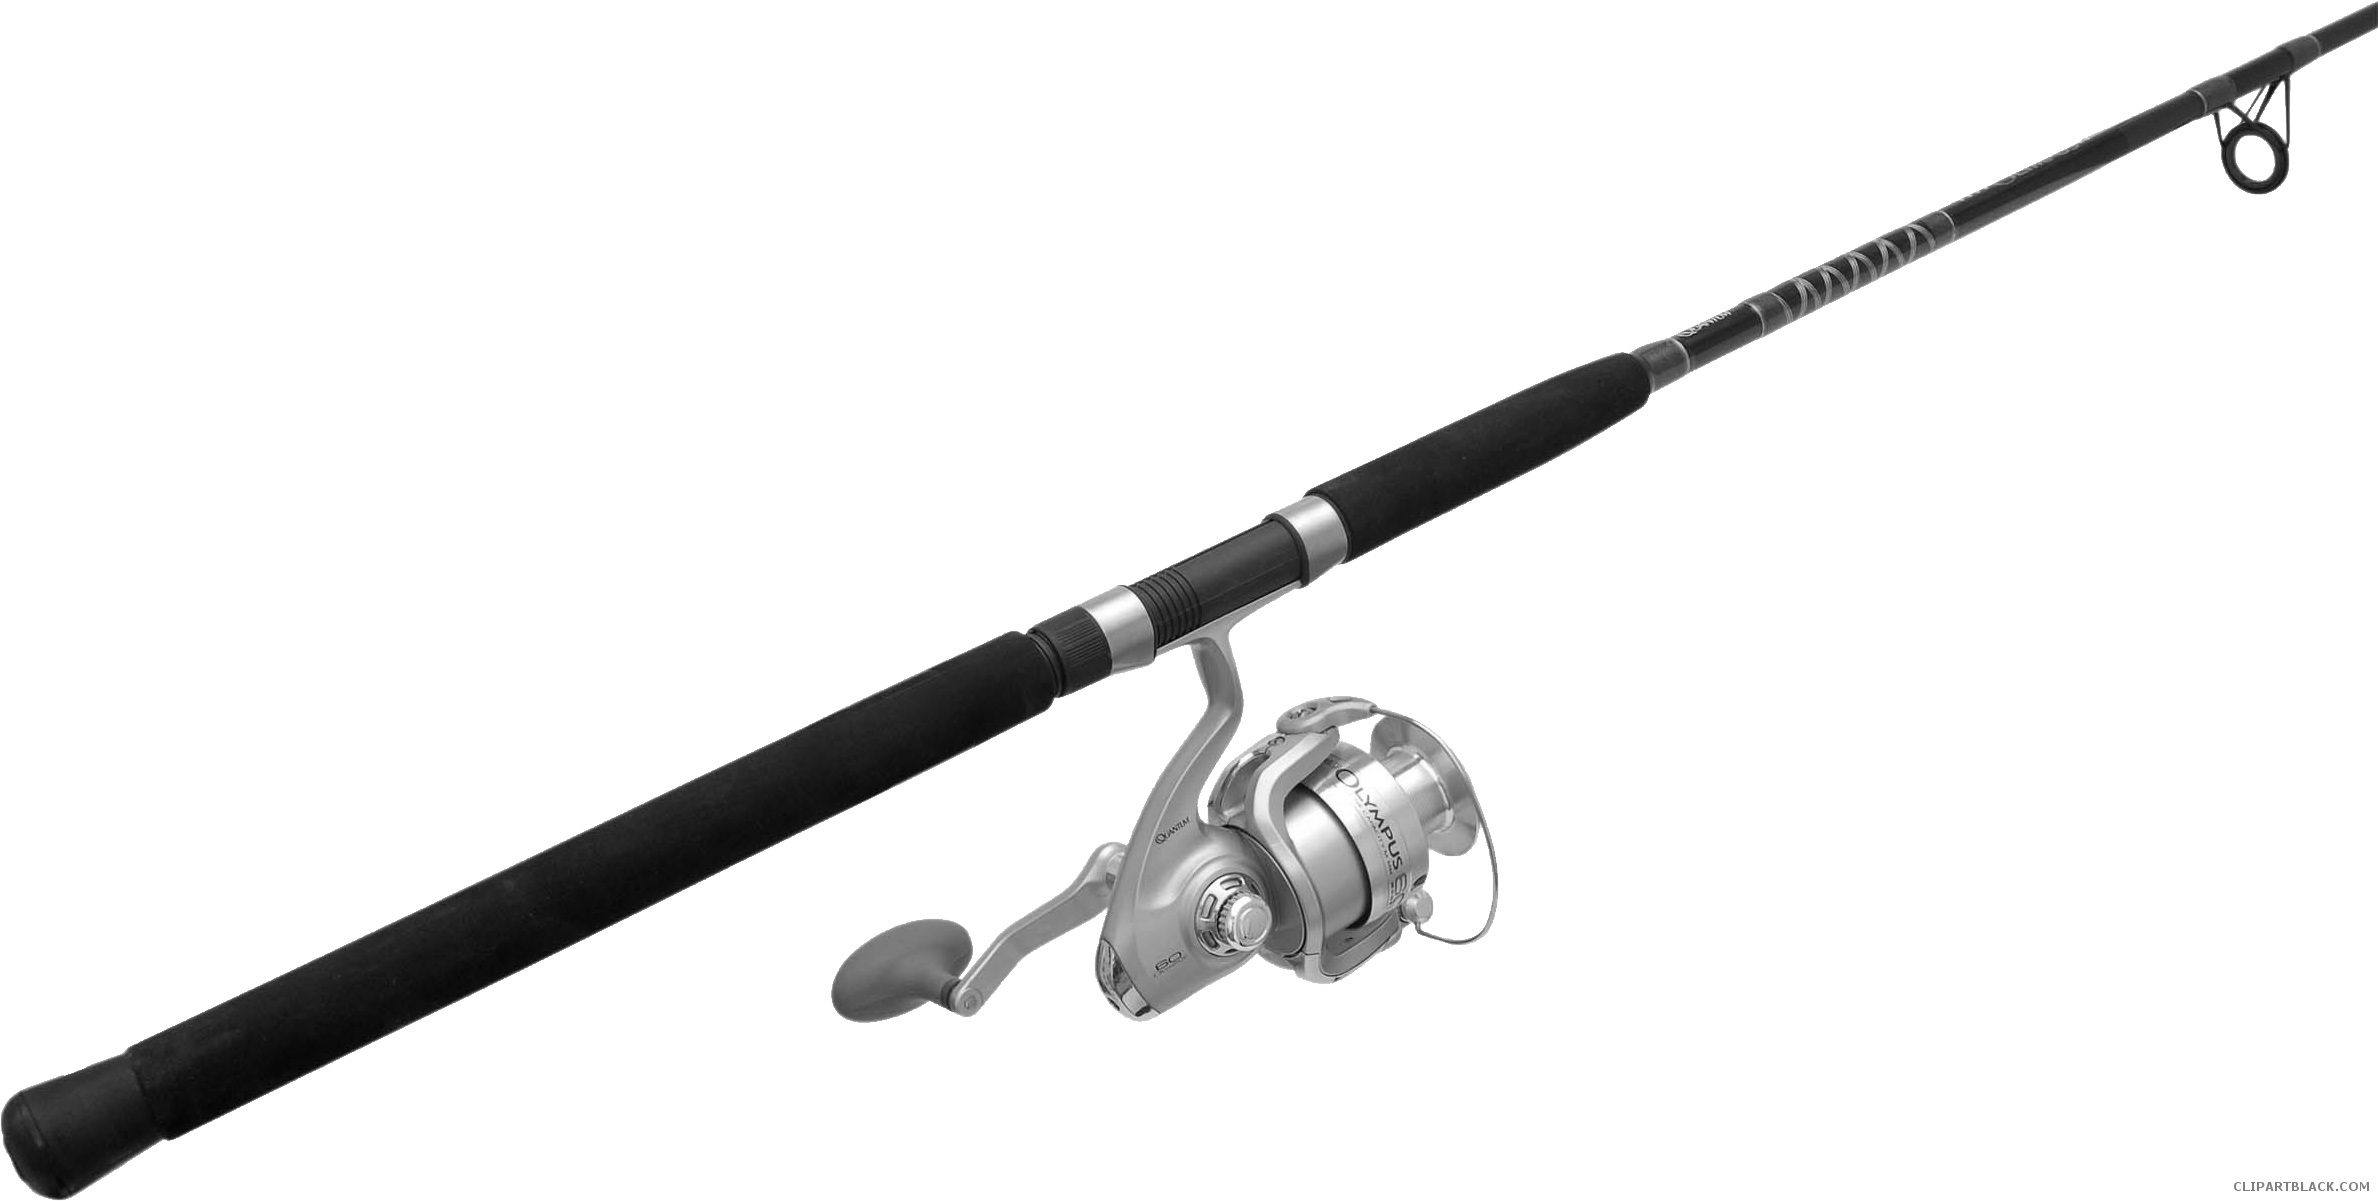 Fishing Pole Tools Free Black White Clipart Images - Fishing Rod And Reel (2378x1201)